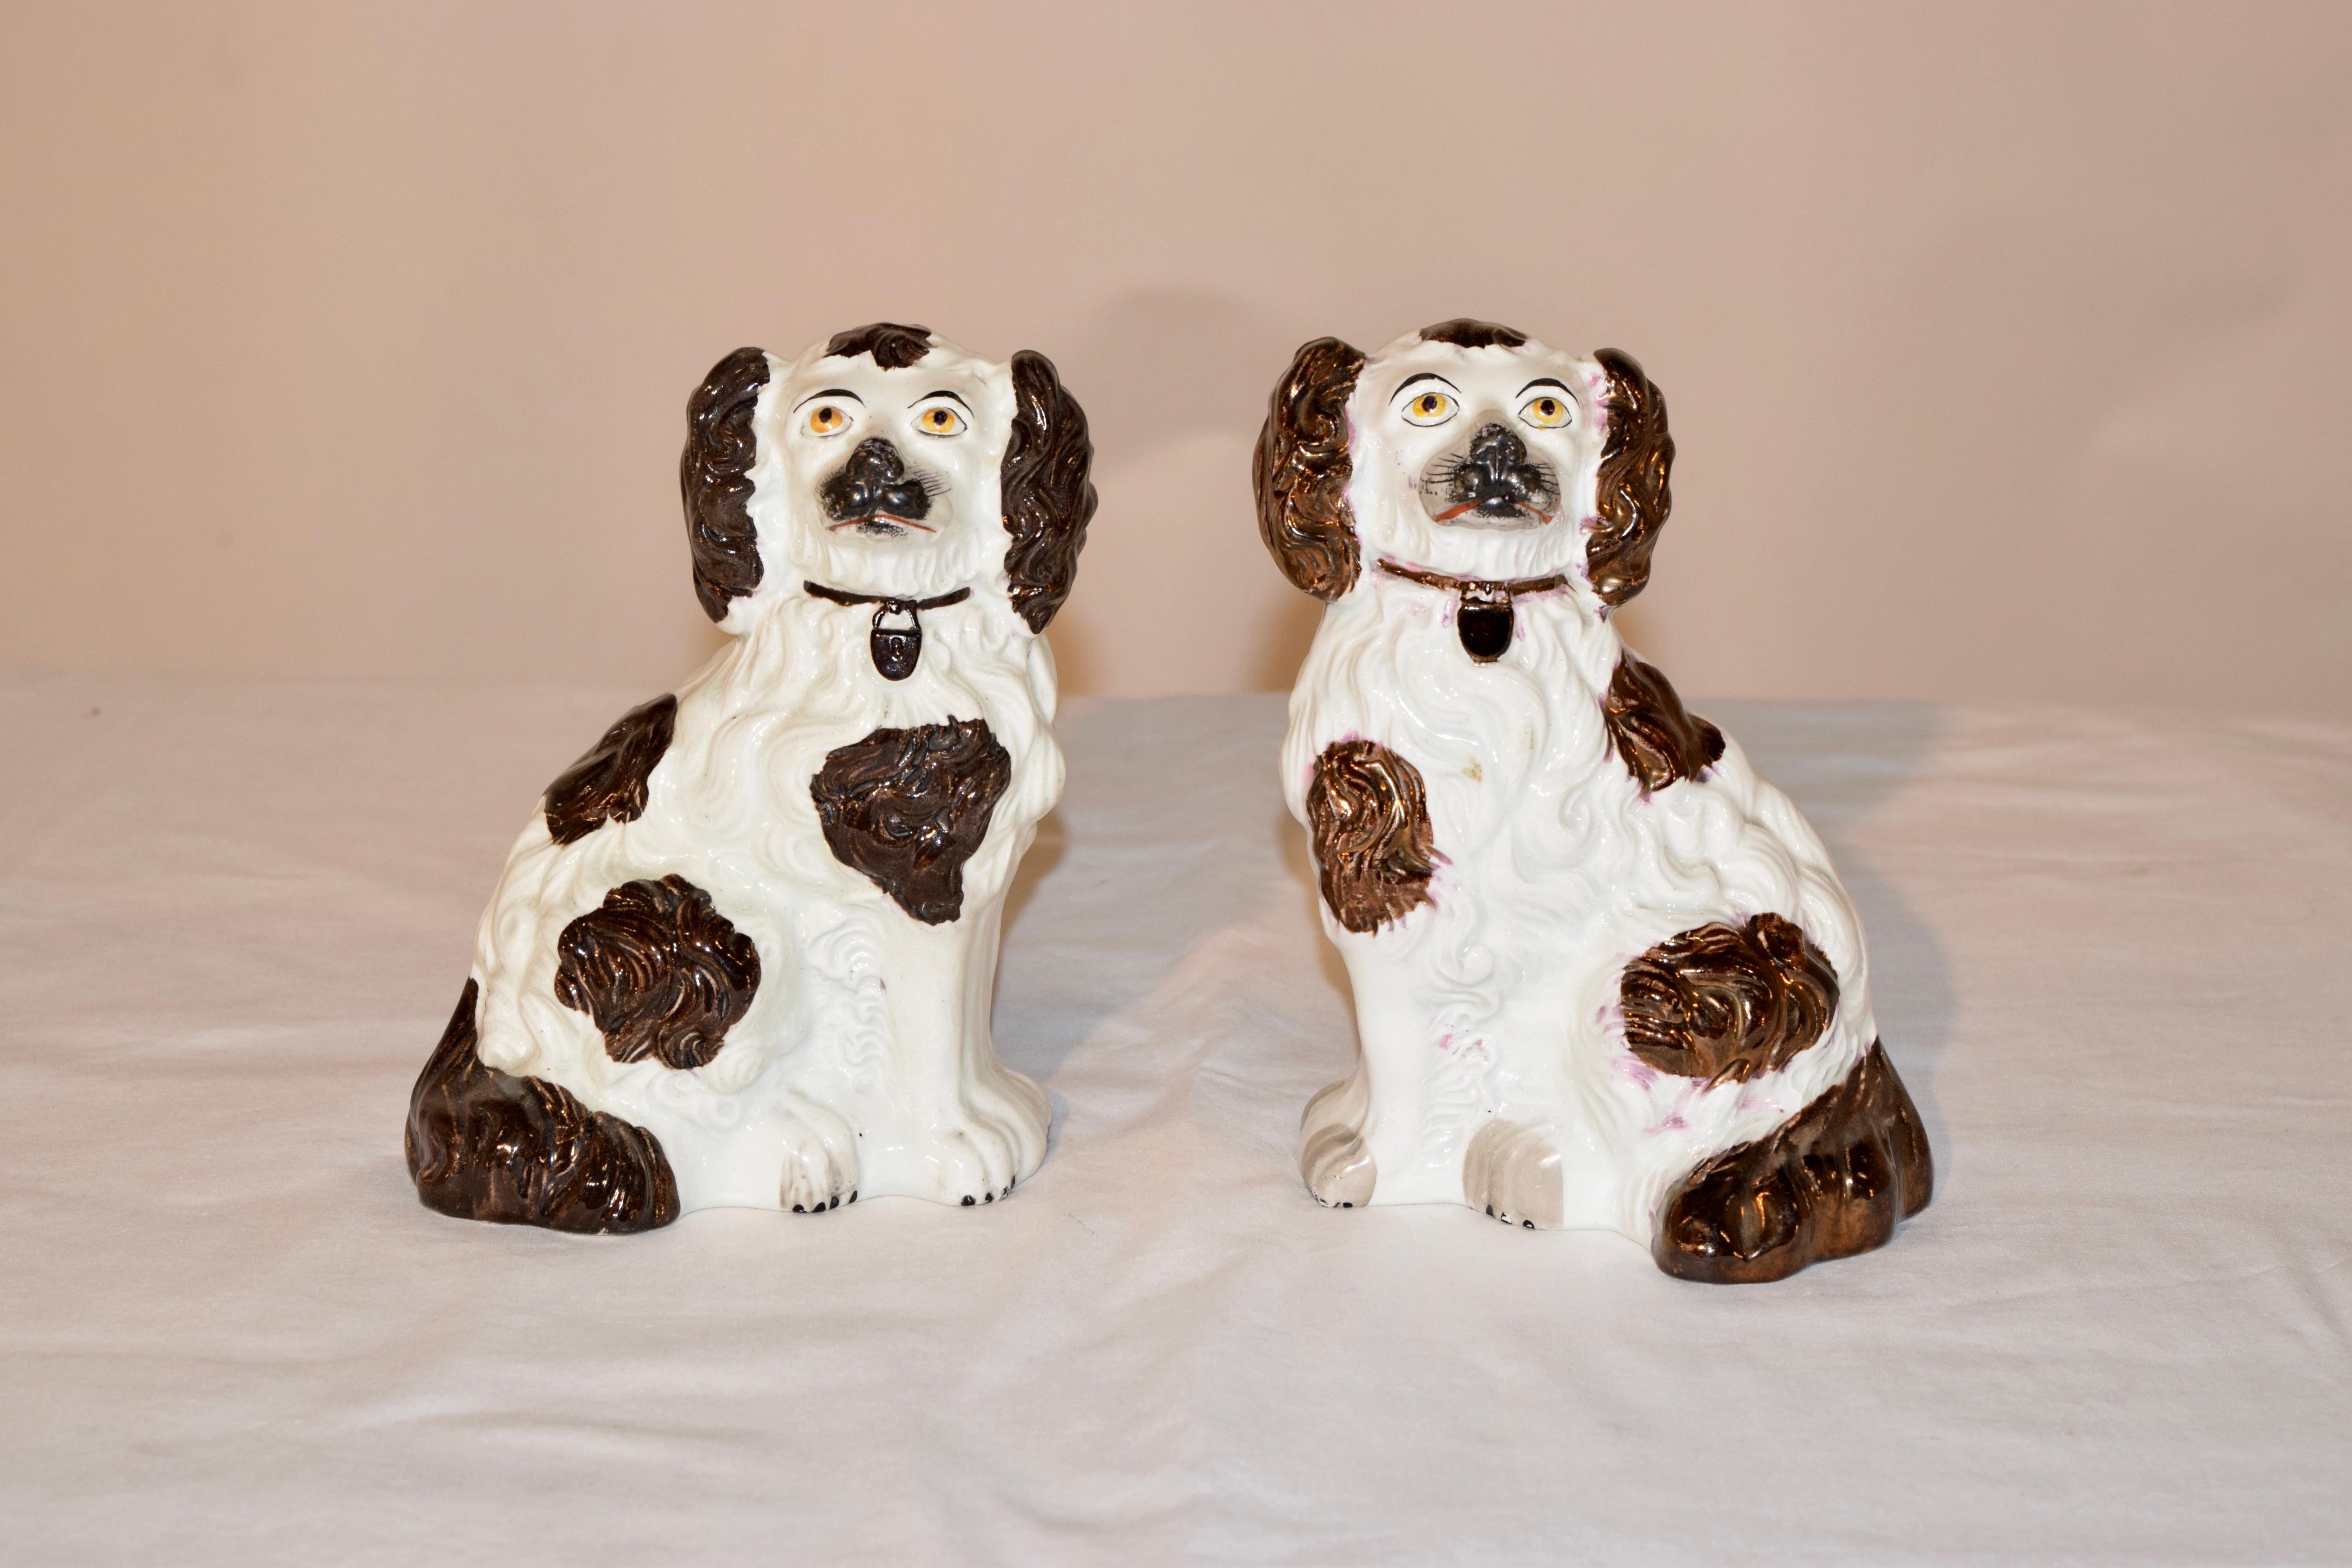 Pair of 19th century Staffordshire spaniels from England made from wonderfully detailed molds, decorated with brown and copper lustre decoration.